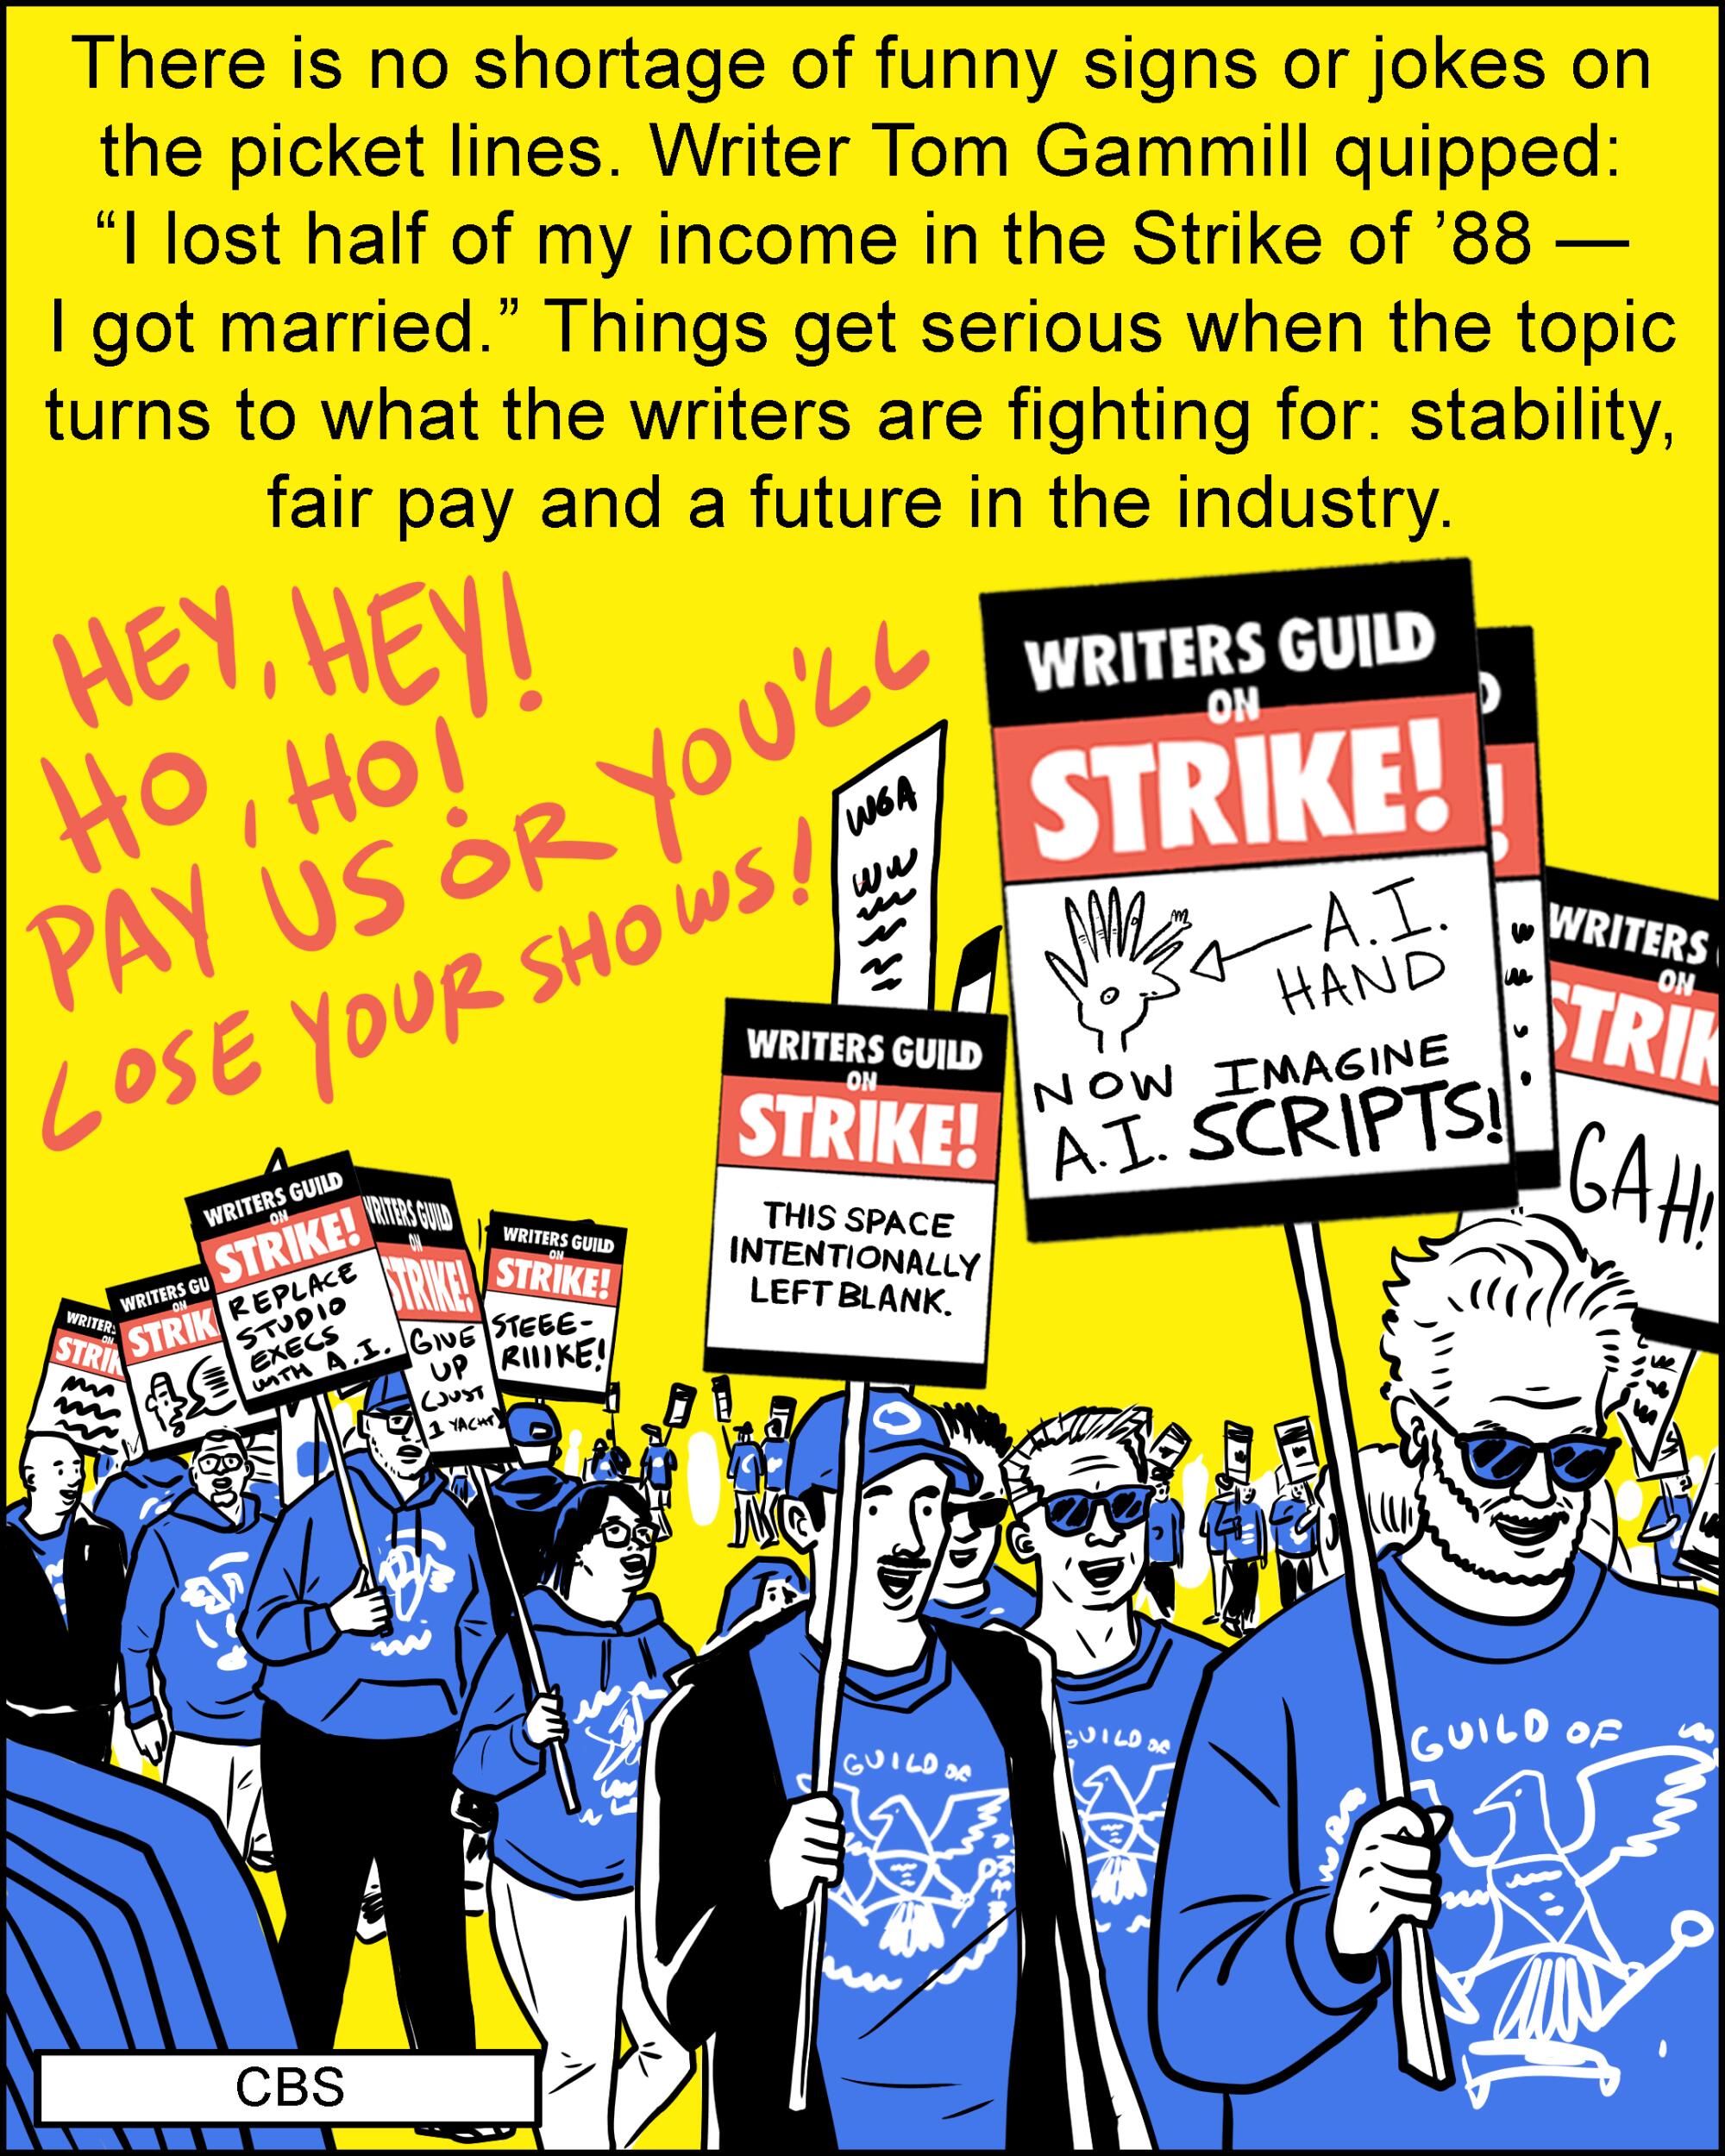 There's no shortage of funny picket signs, but things get serious on topics like fair pay and a future in the industry.